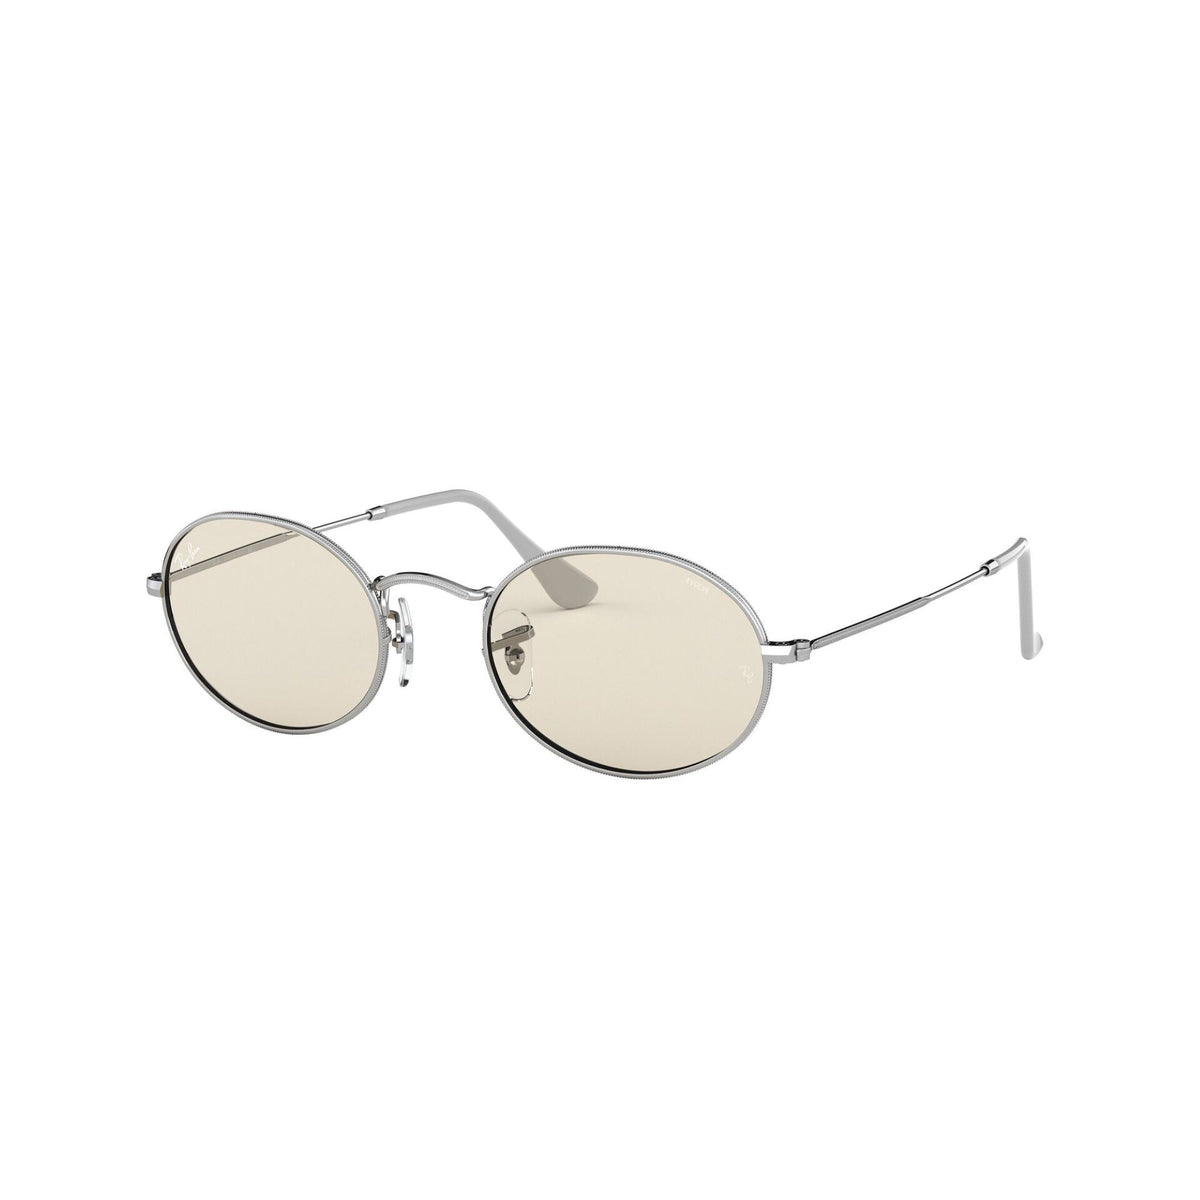 Ray-Ban Unisex Sunglasses Oval Silver Evolve Photo Brown to Grey Metal Metal  0RB3547 003 T2 54